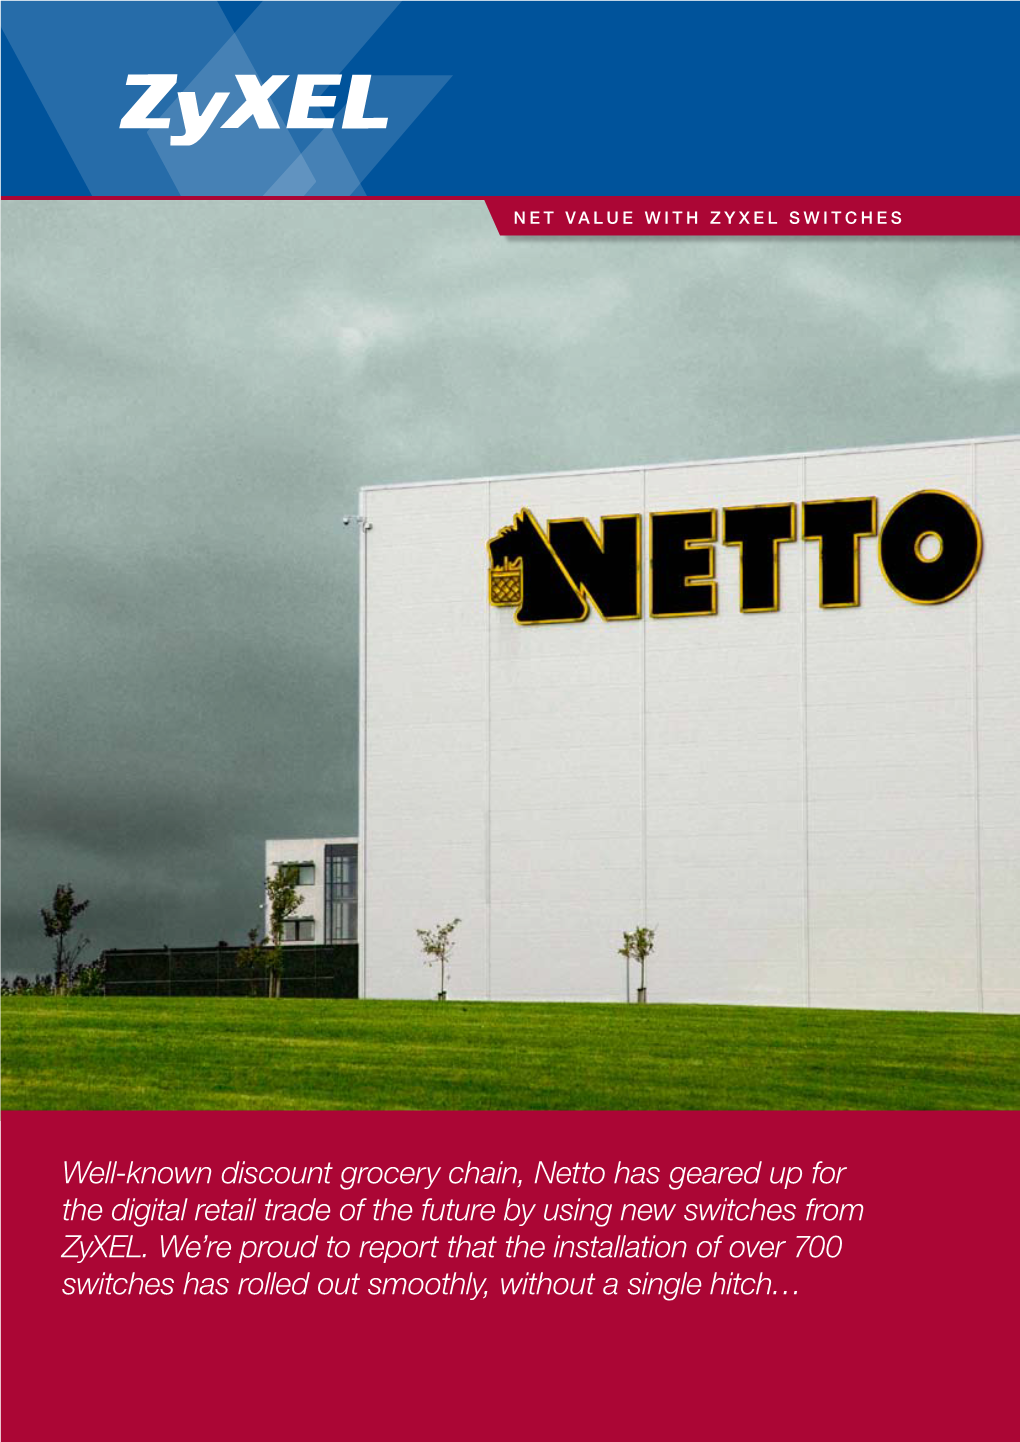 Well-Known Discount Grocery Chain, Netto Has Geared up for the Digital Retail Trade of the Future by Using New Switches from Zyxel